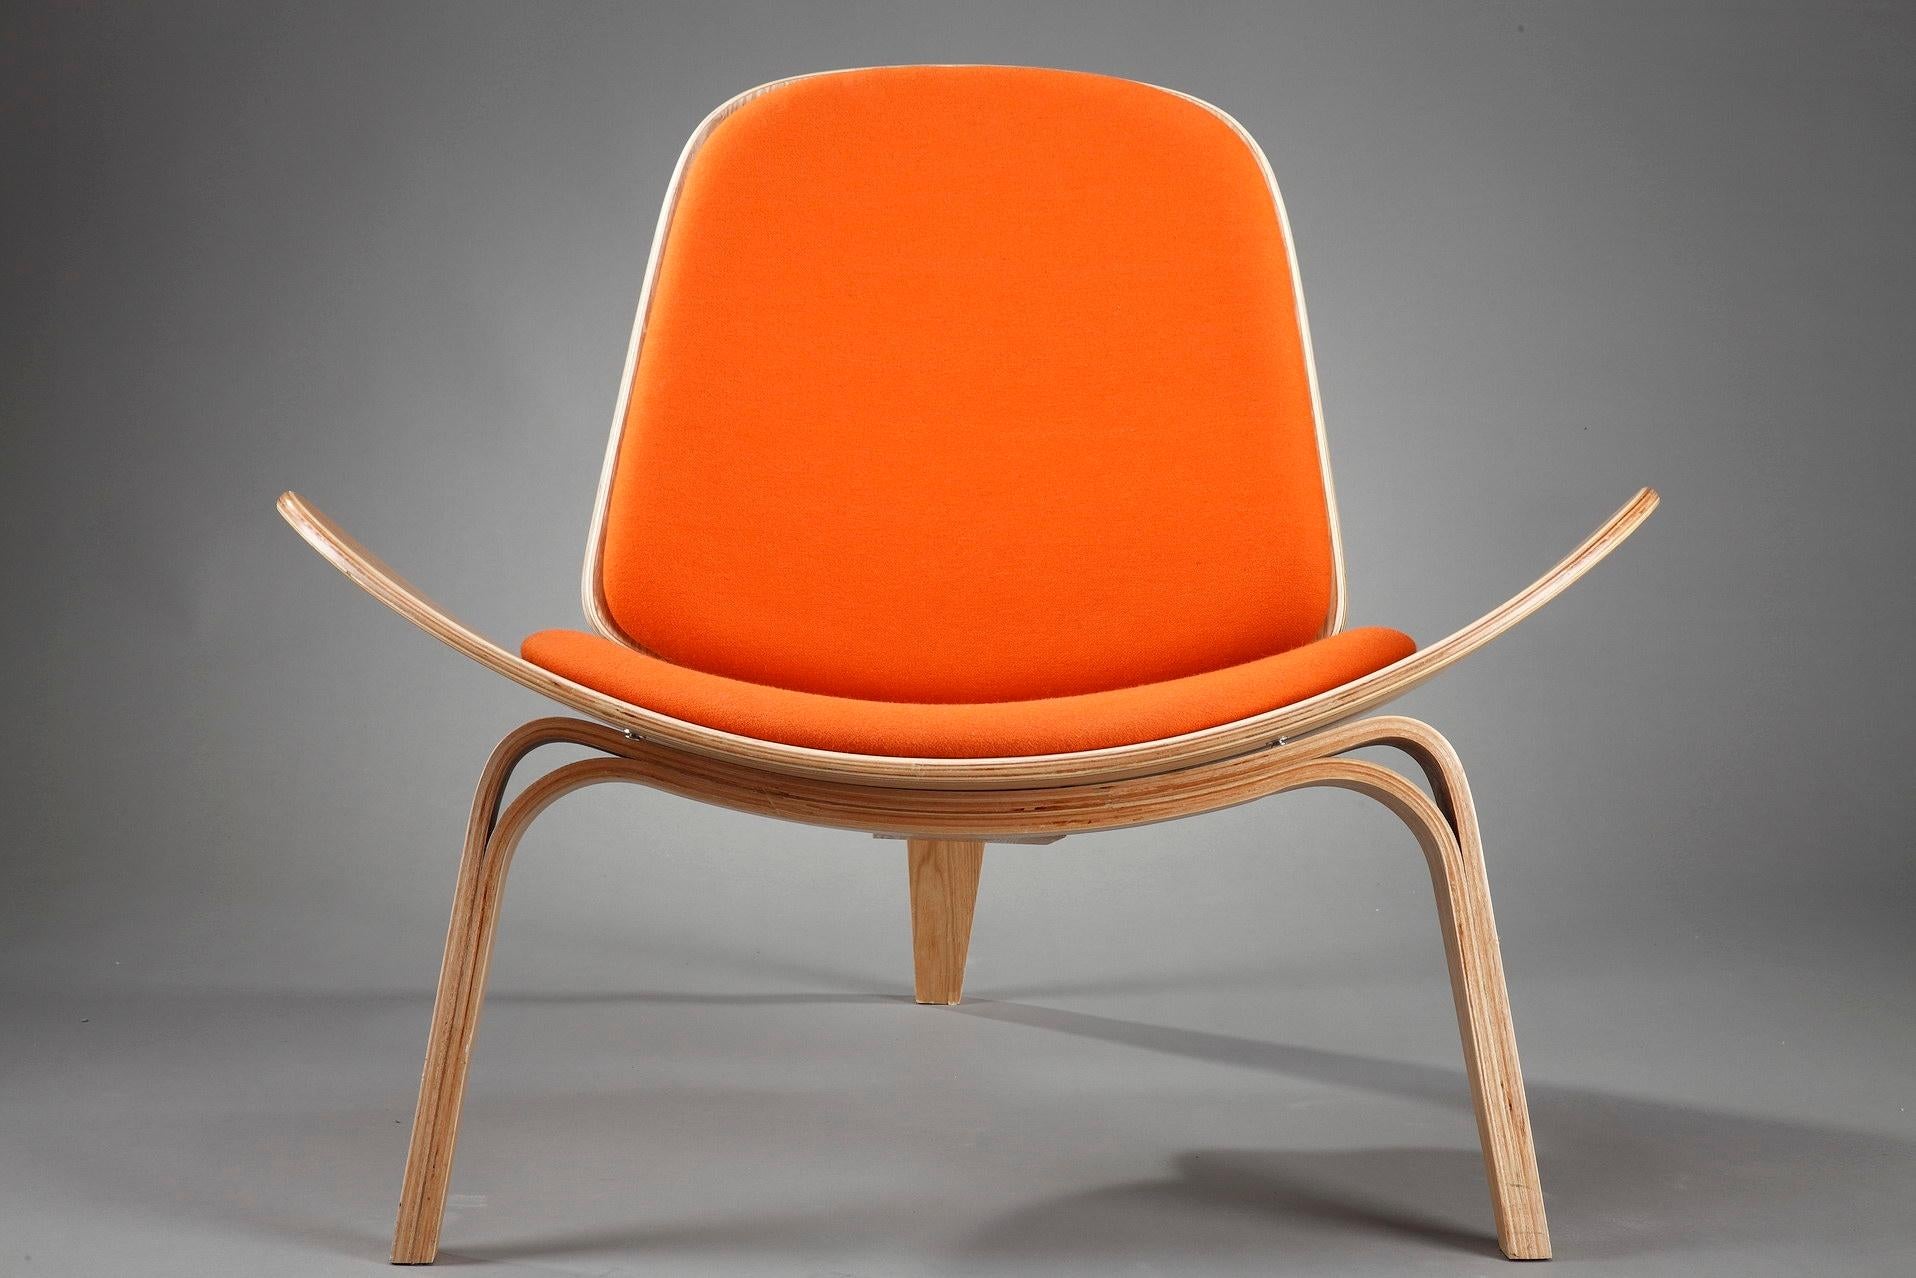 The CH07 shell chair was created in 1963 by the Danish designer Hans J. Wegner (1914-2007). It is crafted in bent plywood with orange fabric upholstery, and rests on three legs. The shell chair achieves a floating lightness due to its wing-like seat